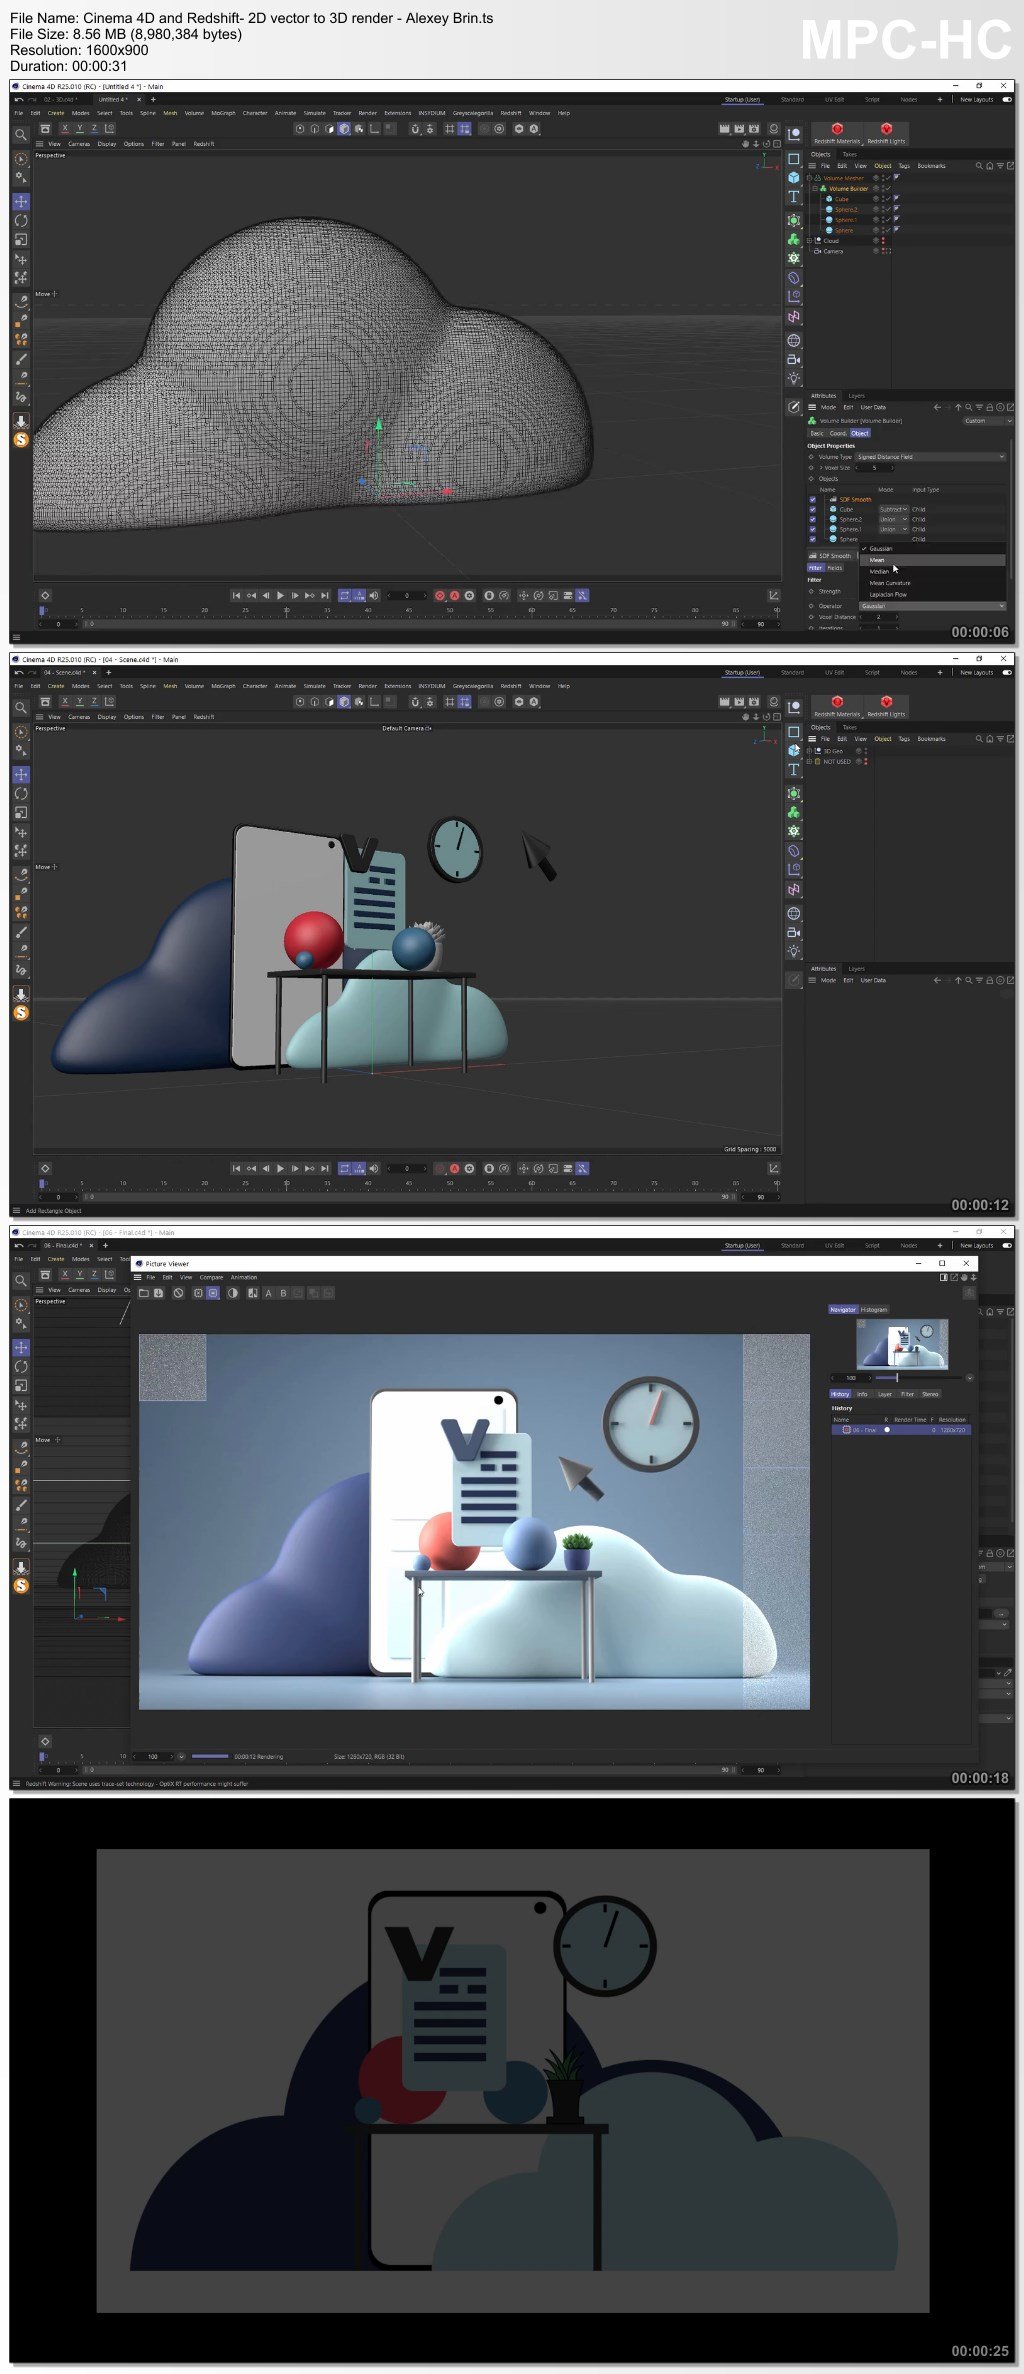 Cinema 4D and Redshift: 2D vector to 3D render